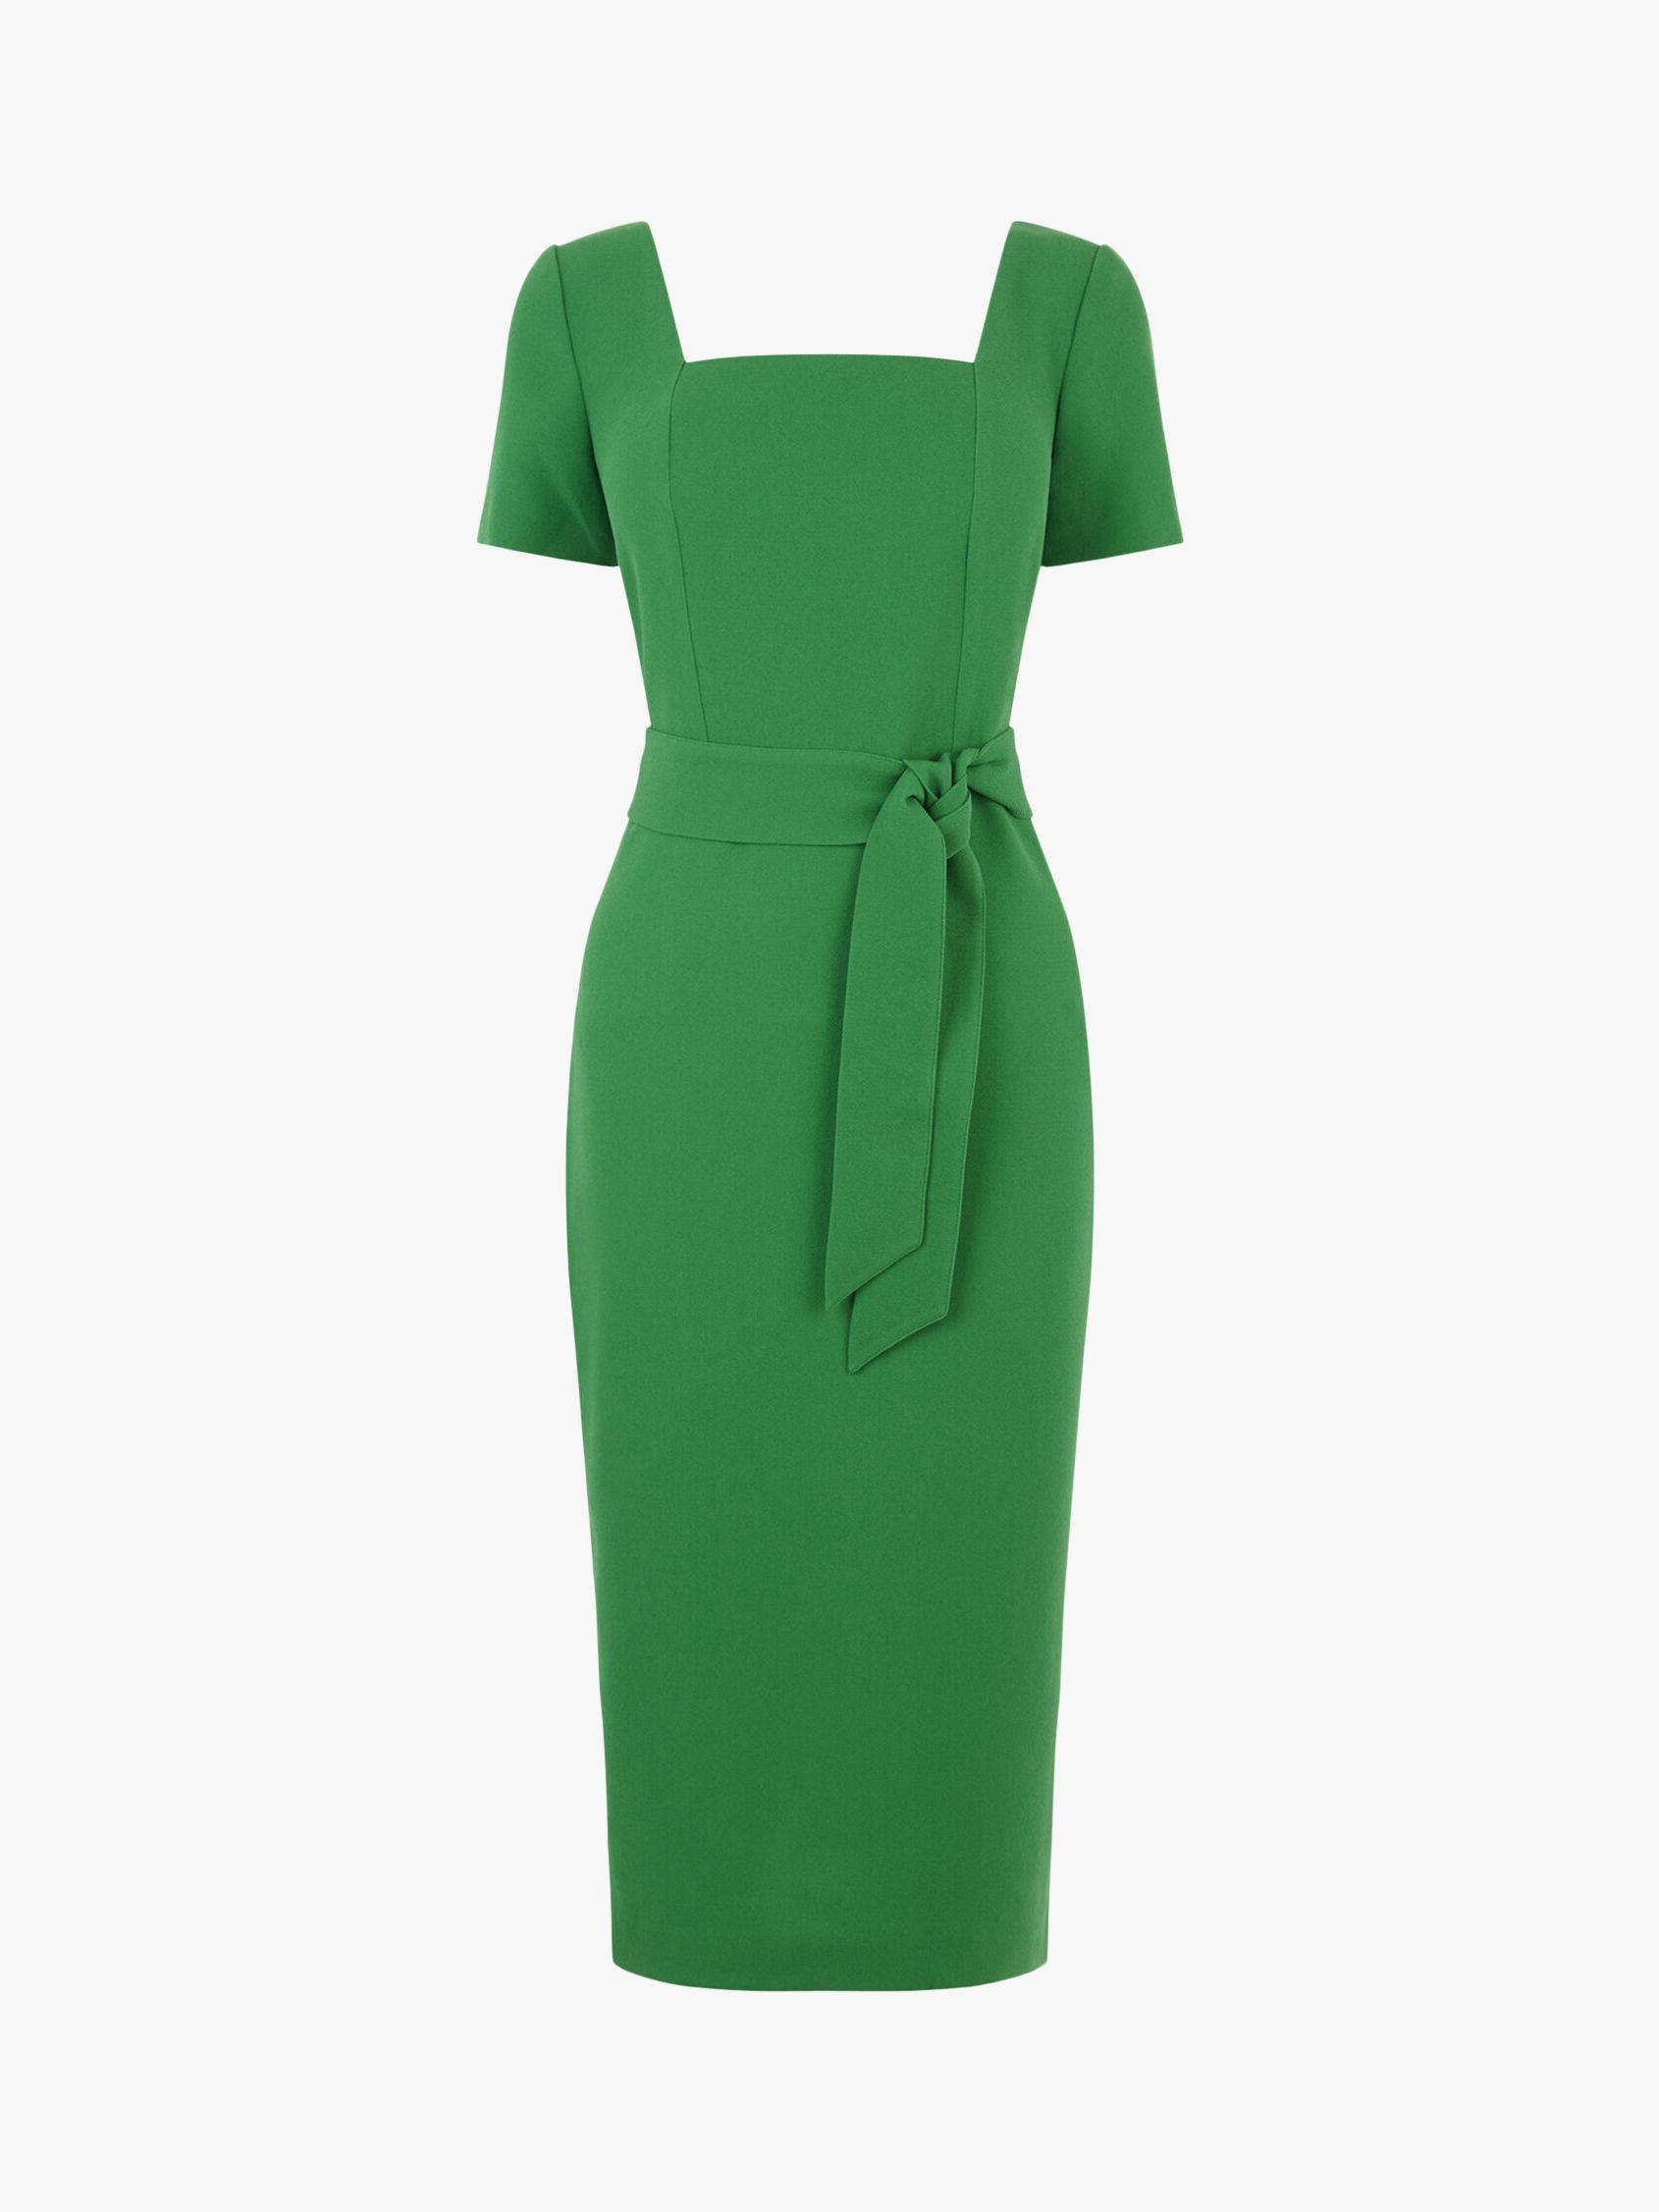 Warehouse Square Neck Cropped Dress, Bright Green